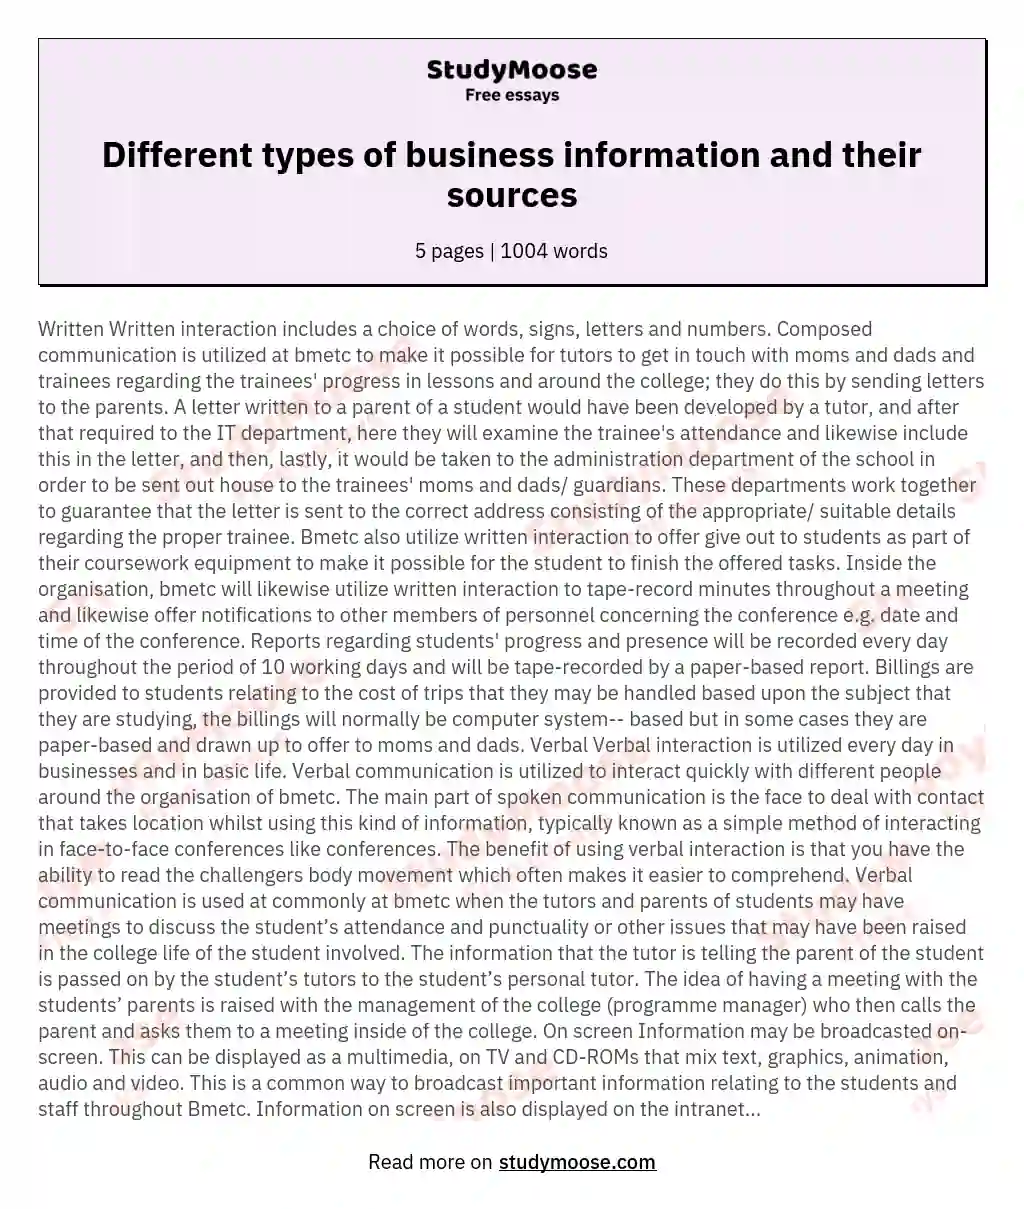 Different types of business information and their sources essay